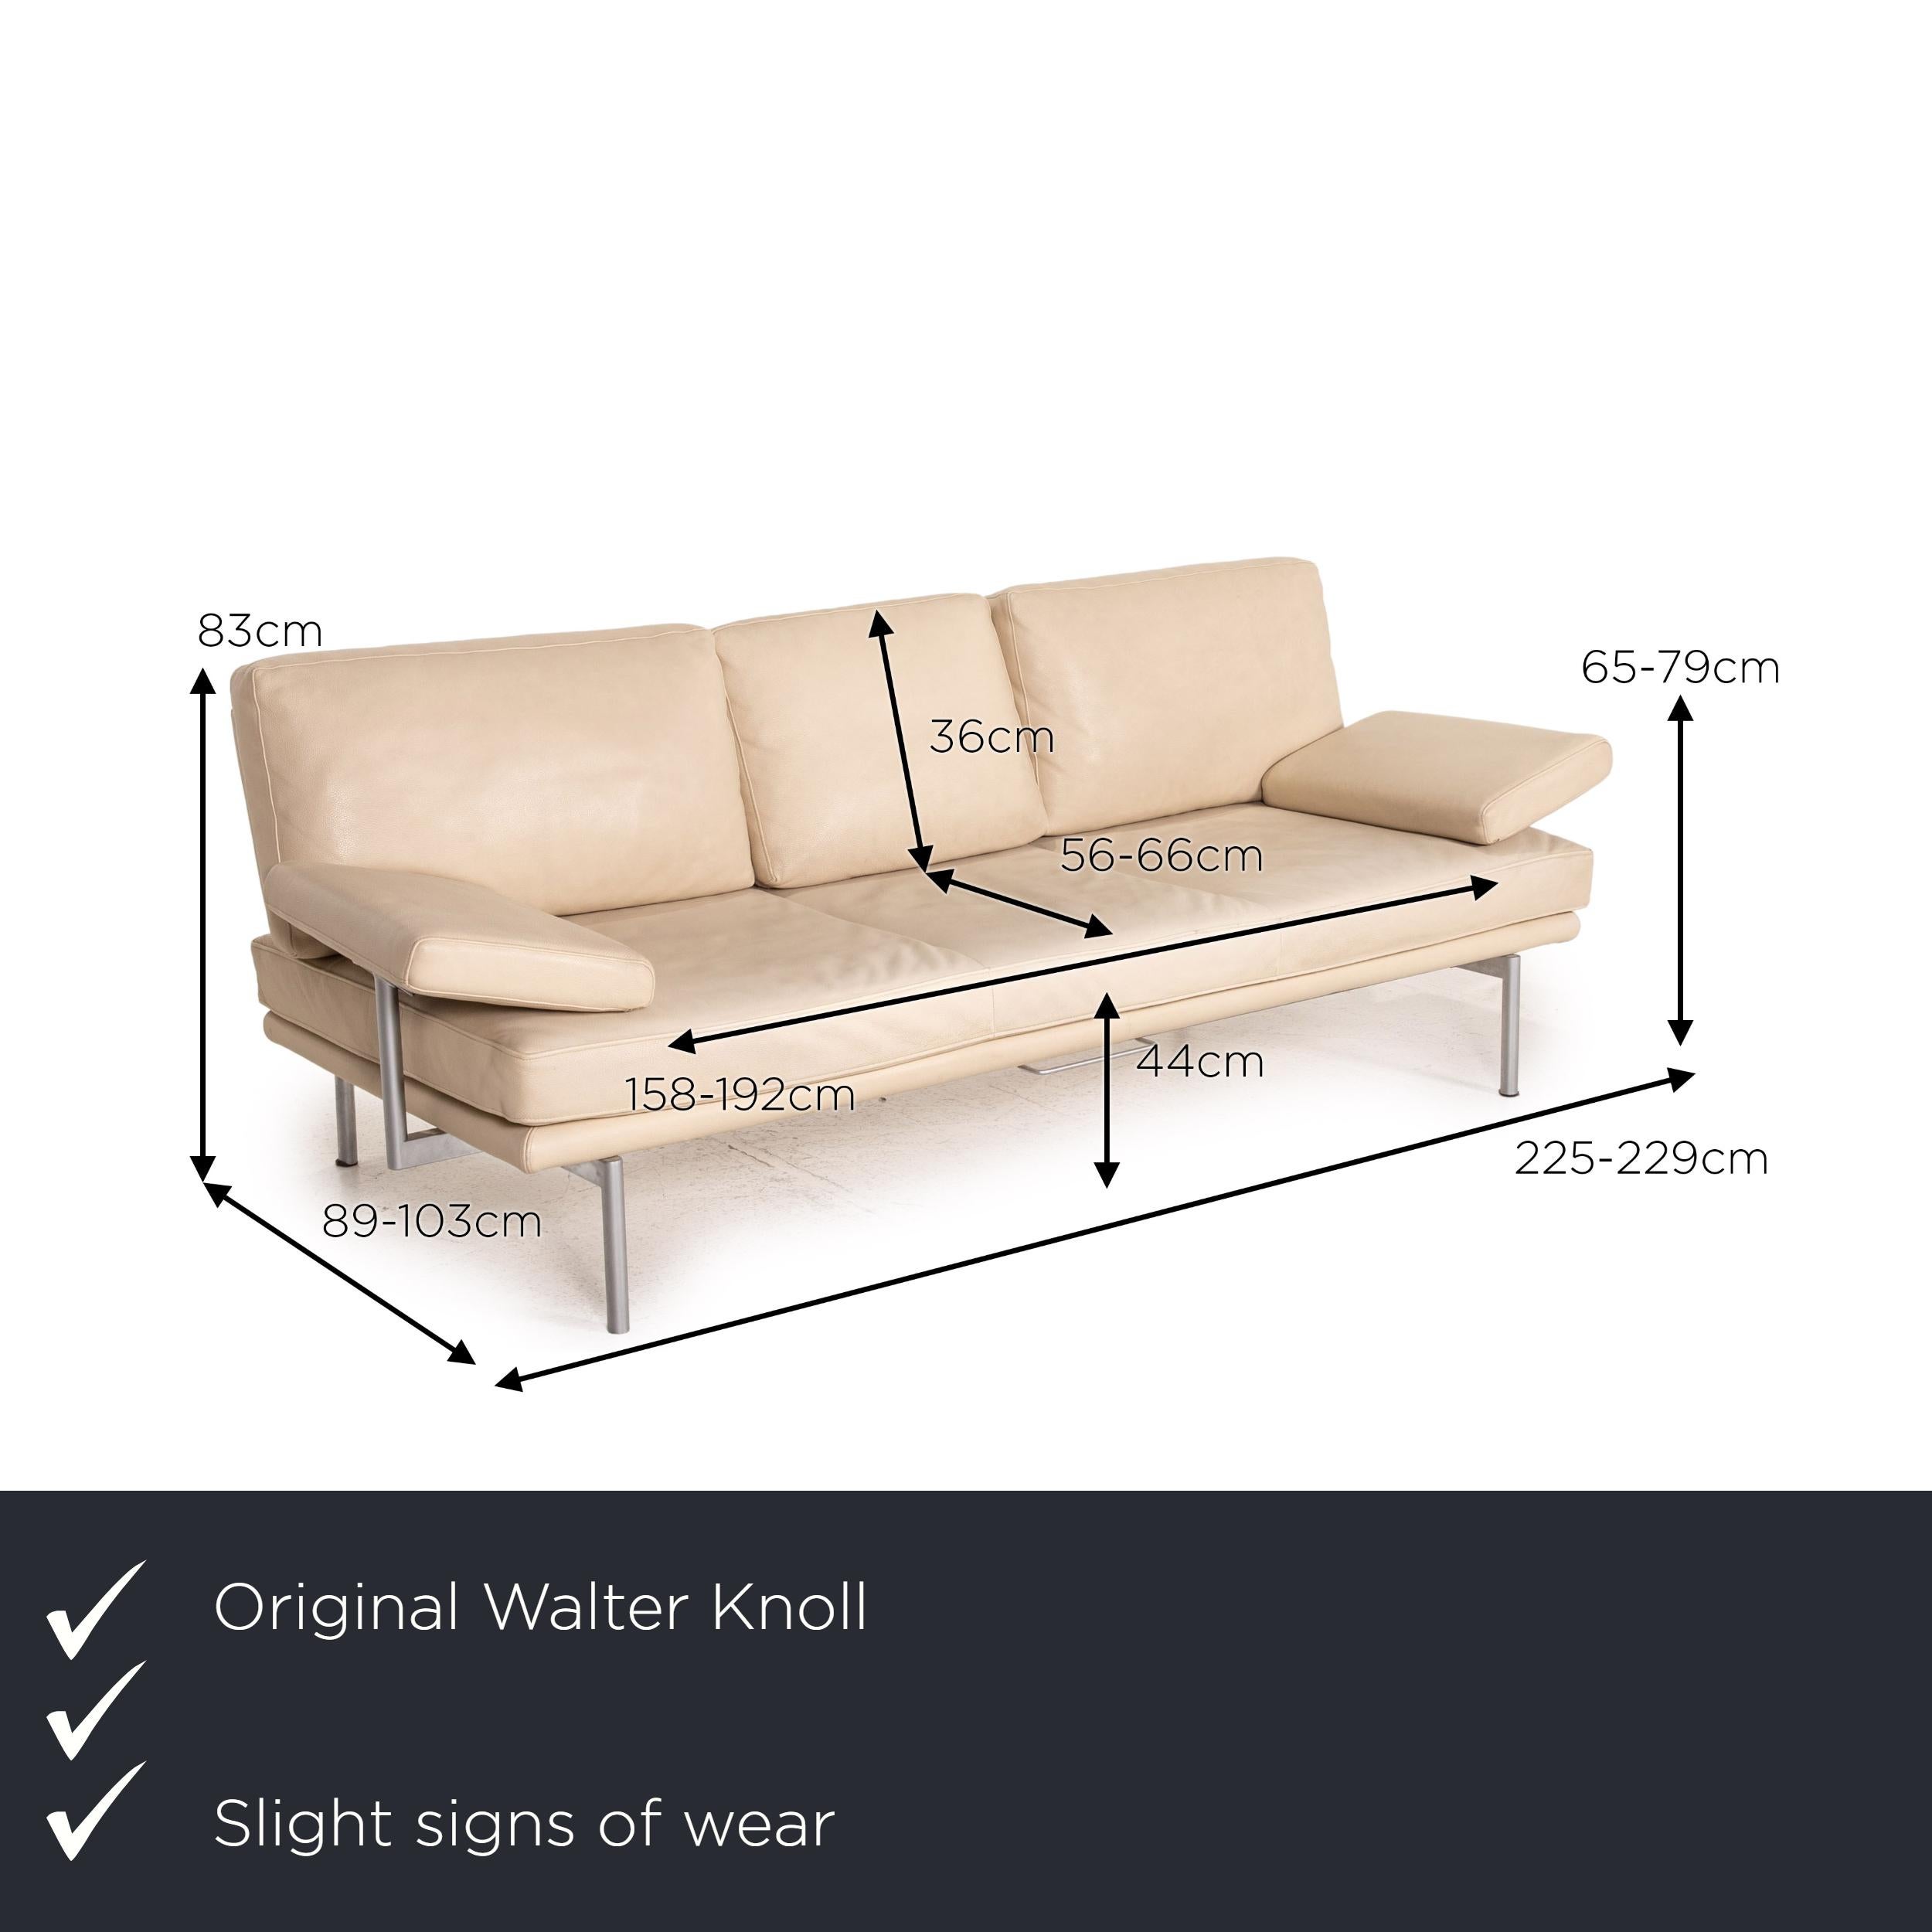 We present to you a Walter Knoll living platform leather sofa beige three-seater function Coucg.

Product measurements in centimeters:

Depth 89
Width 225
Height 83
Seat height 44
Rest height 65
Seat depth 53
Seat width 158
Back height